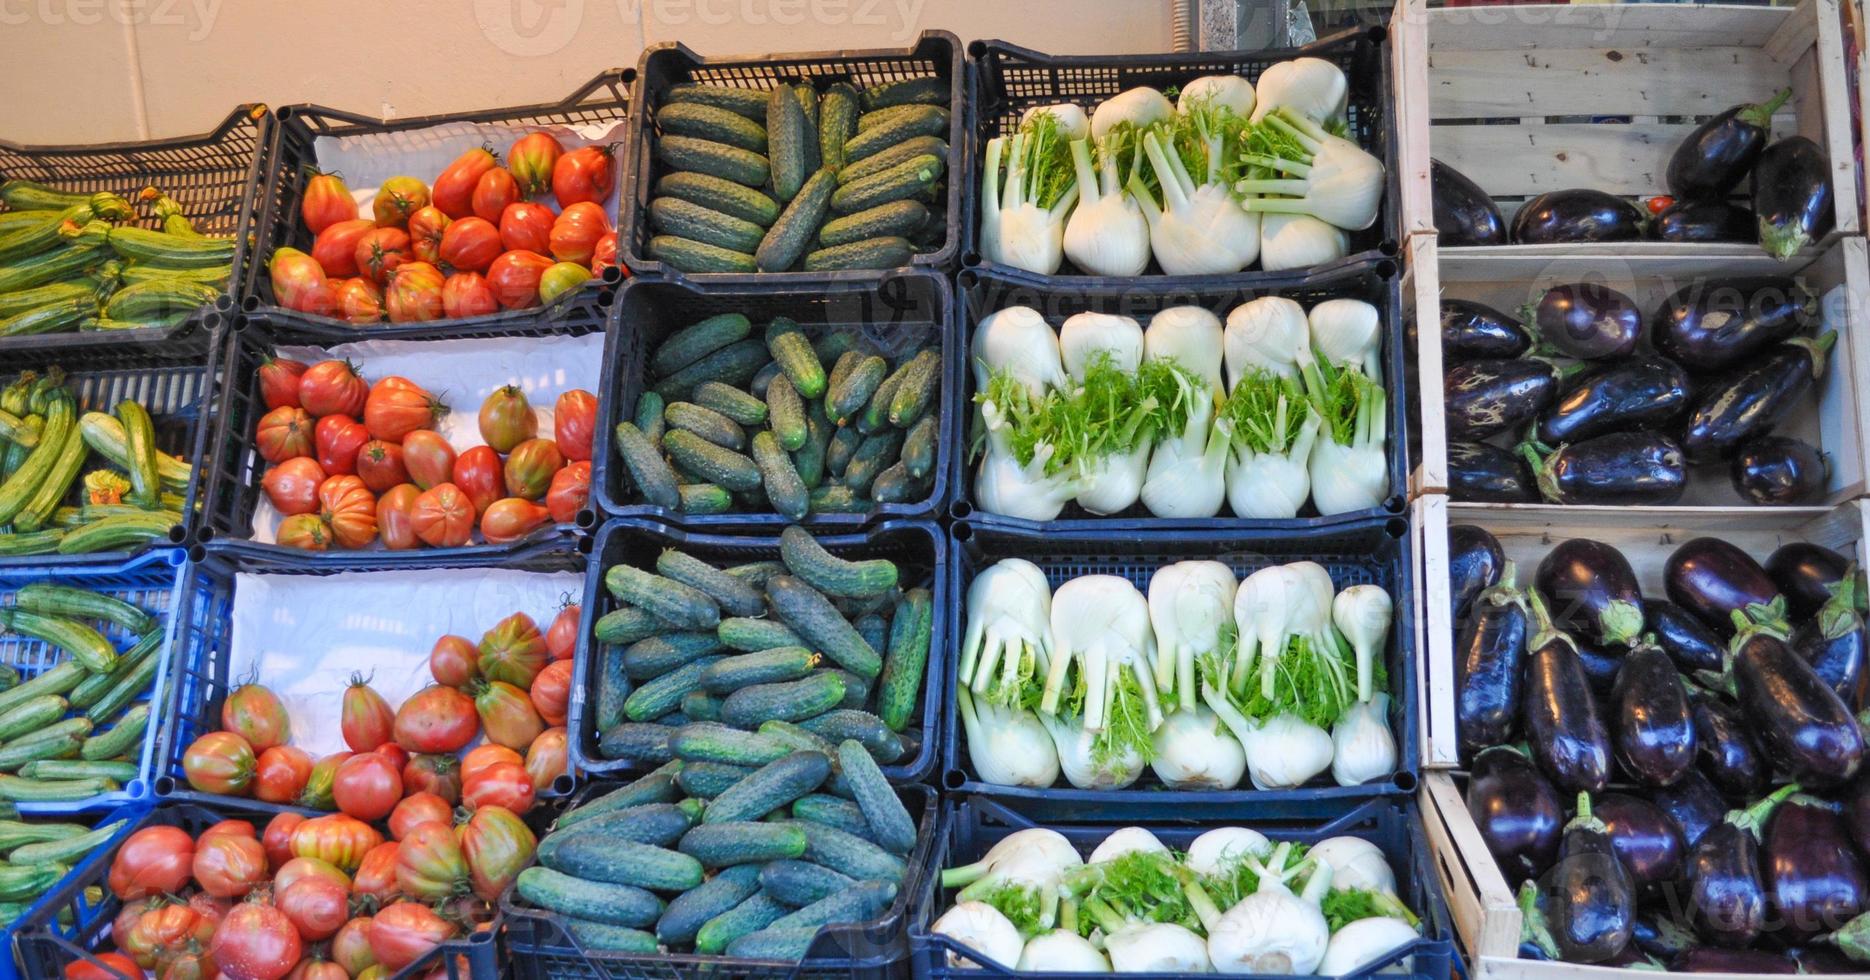 Vegetables in crate on a market shelf photo